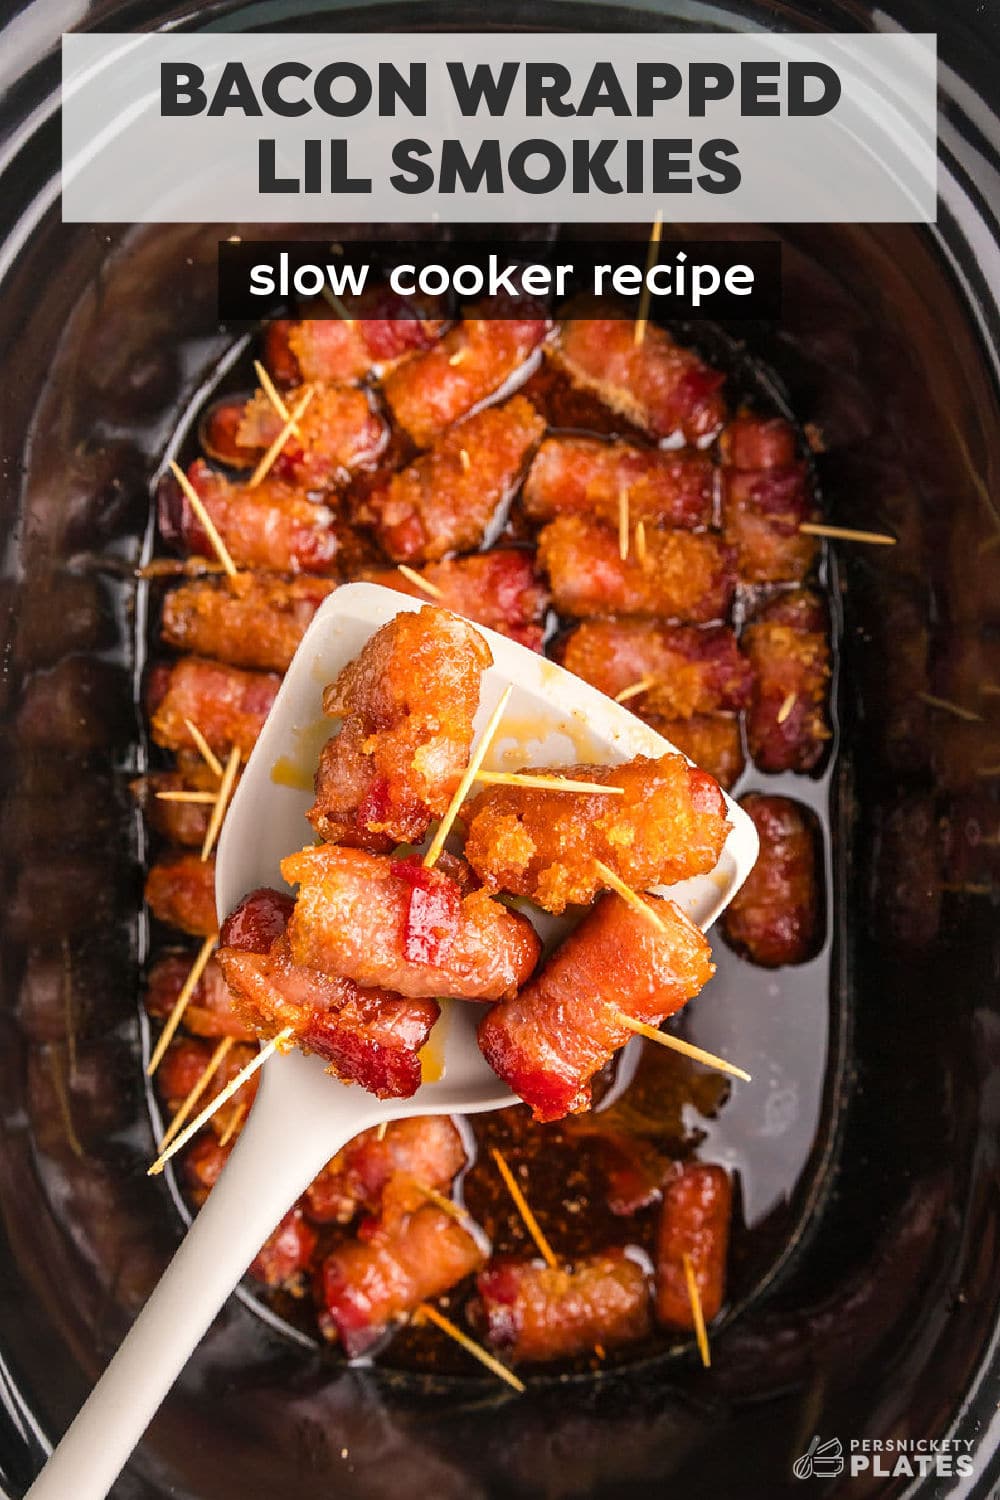 Bacon Wrapped Little Smokies are a crowd favorite and the best part is, you only need FOUR ingredients to make this easy appetizer in the crock pot. | www.persnicketyplates.com